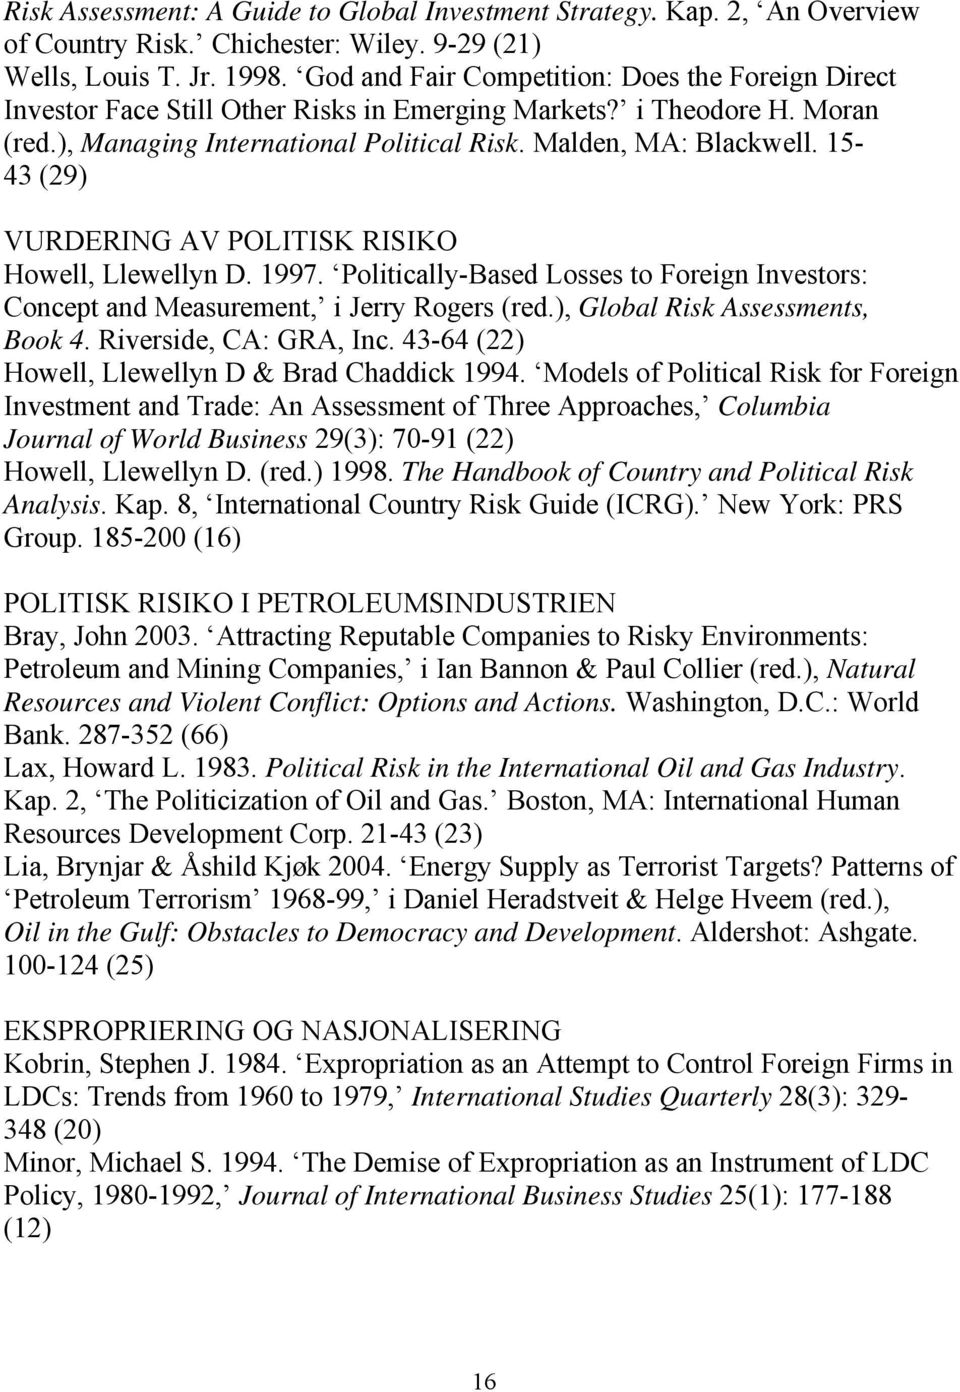 15-43 (29) VURDERING AV POLITISK RISIKO Howell, Llewellyn D. 1997. Politically-Based Losses to Foreign Investors: Concept and Measurement, i Jerry Rogers (red.), Global Risk Assessments, Book 4.